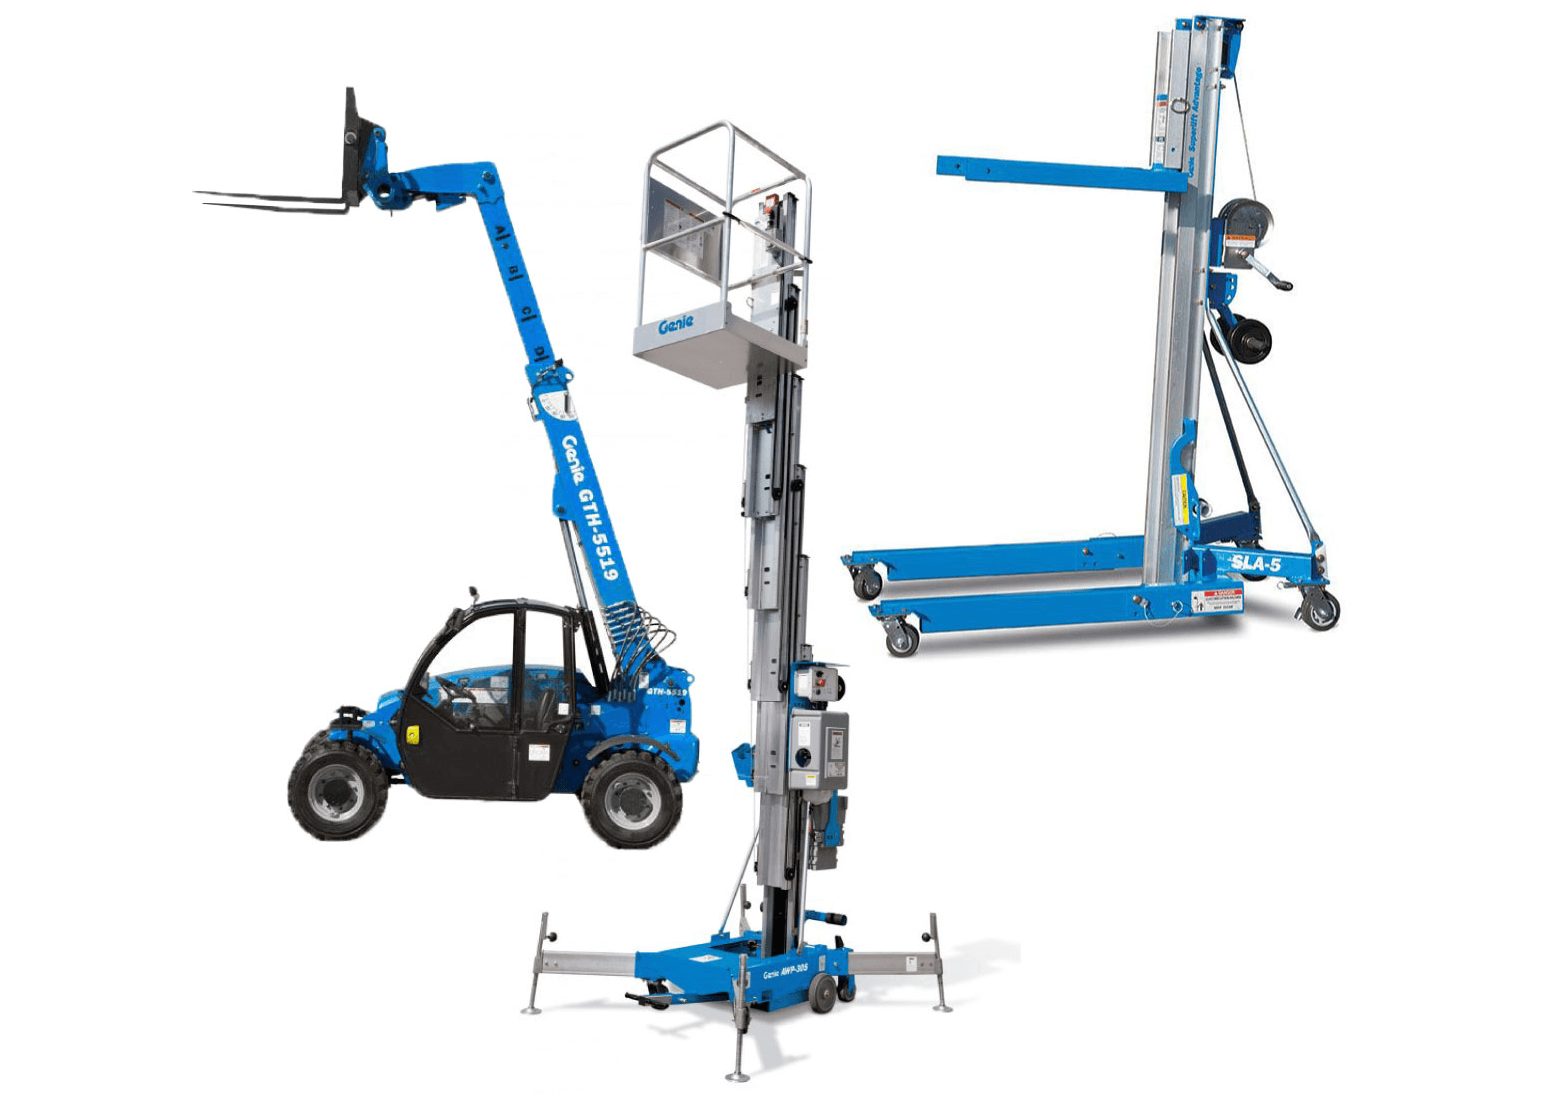 Low Prices on New or Used Genie Lifts For Sale